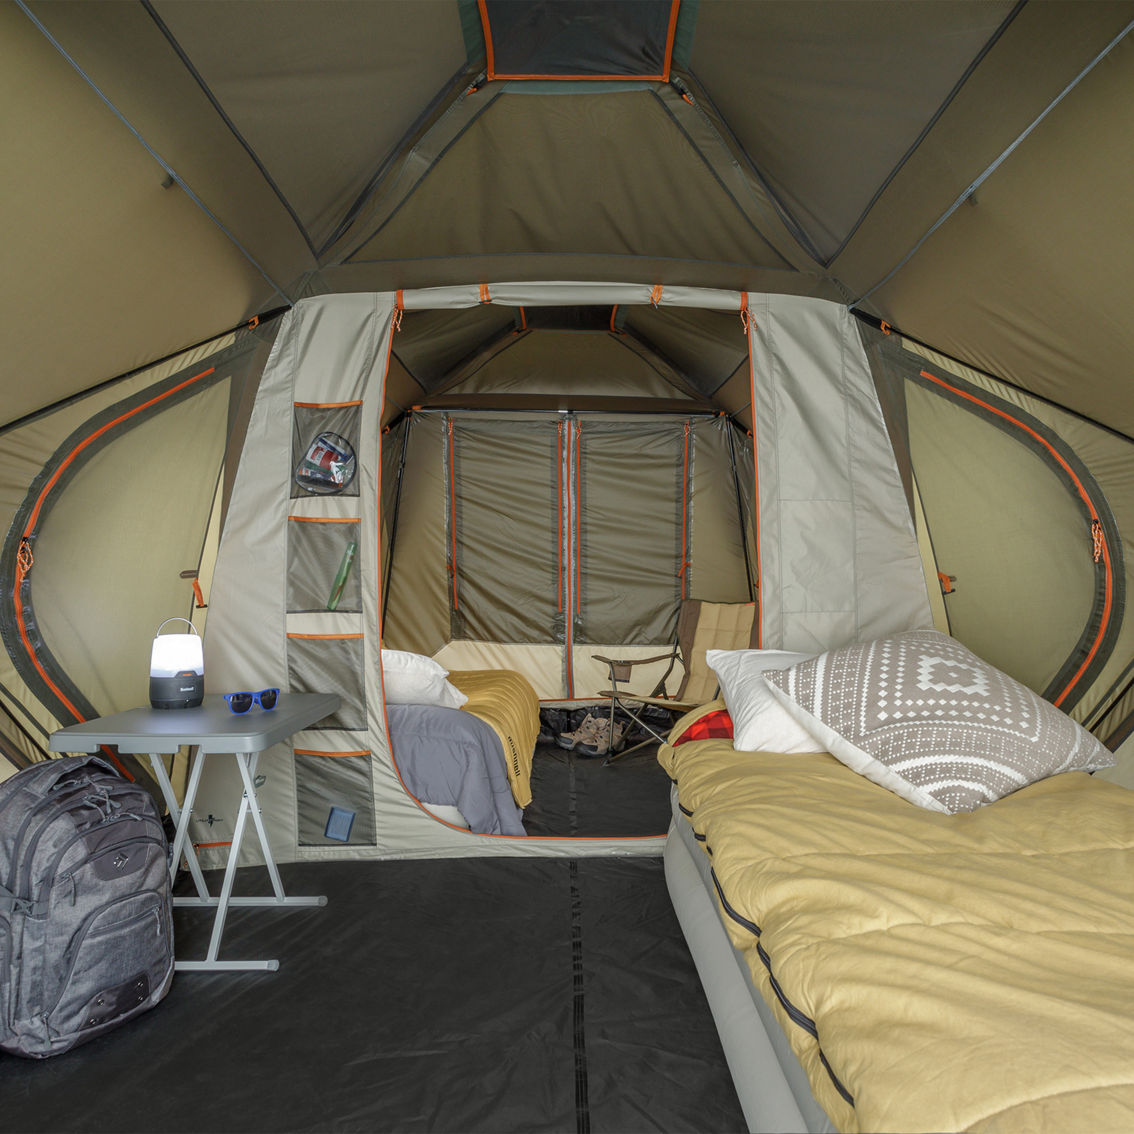 Bushnell 8 Person Pop-Up Hub Tent - Image 4 of 7